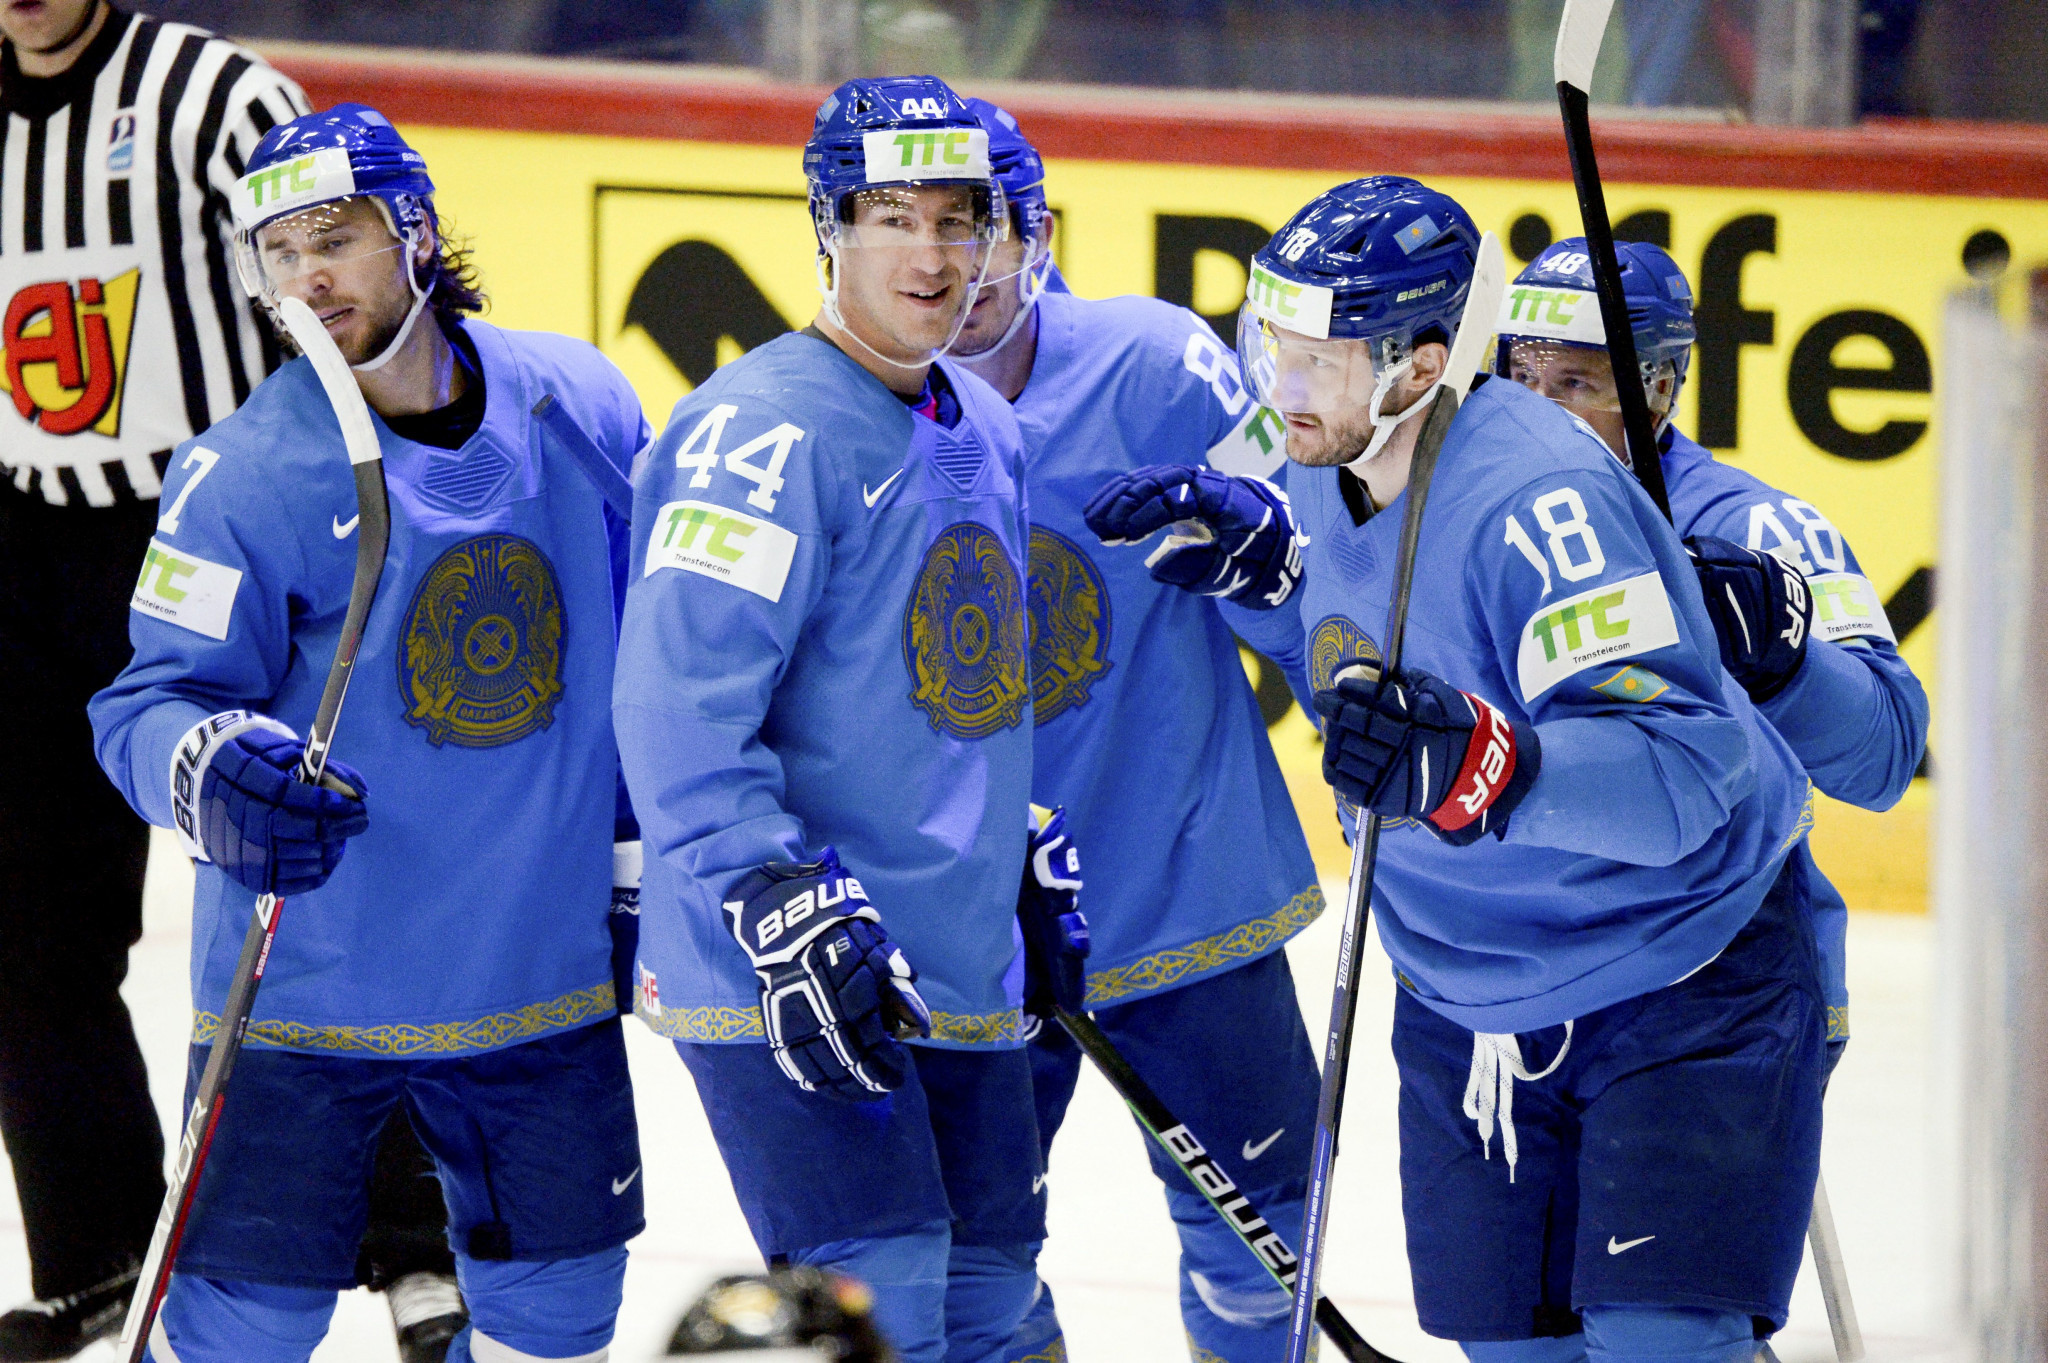 Kazakhstan is interested in staging the 2027 IIHF World Championship ©Getty Images